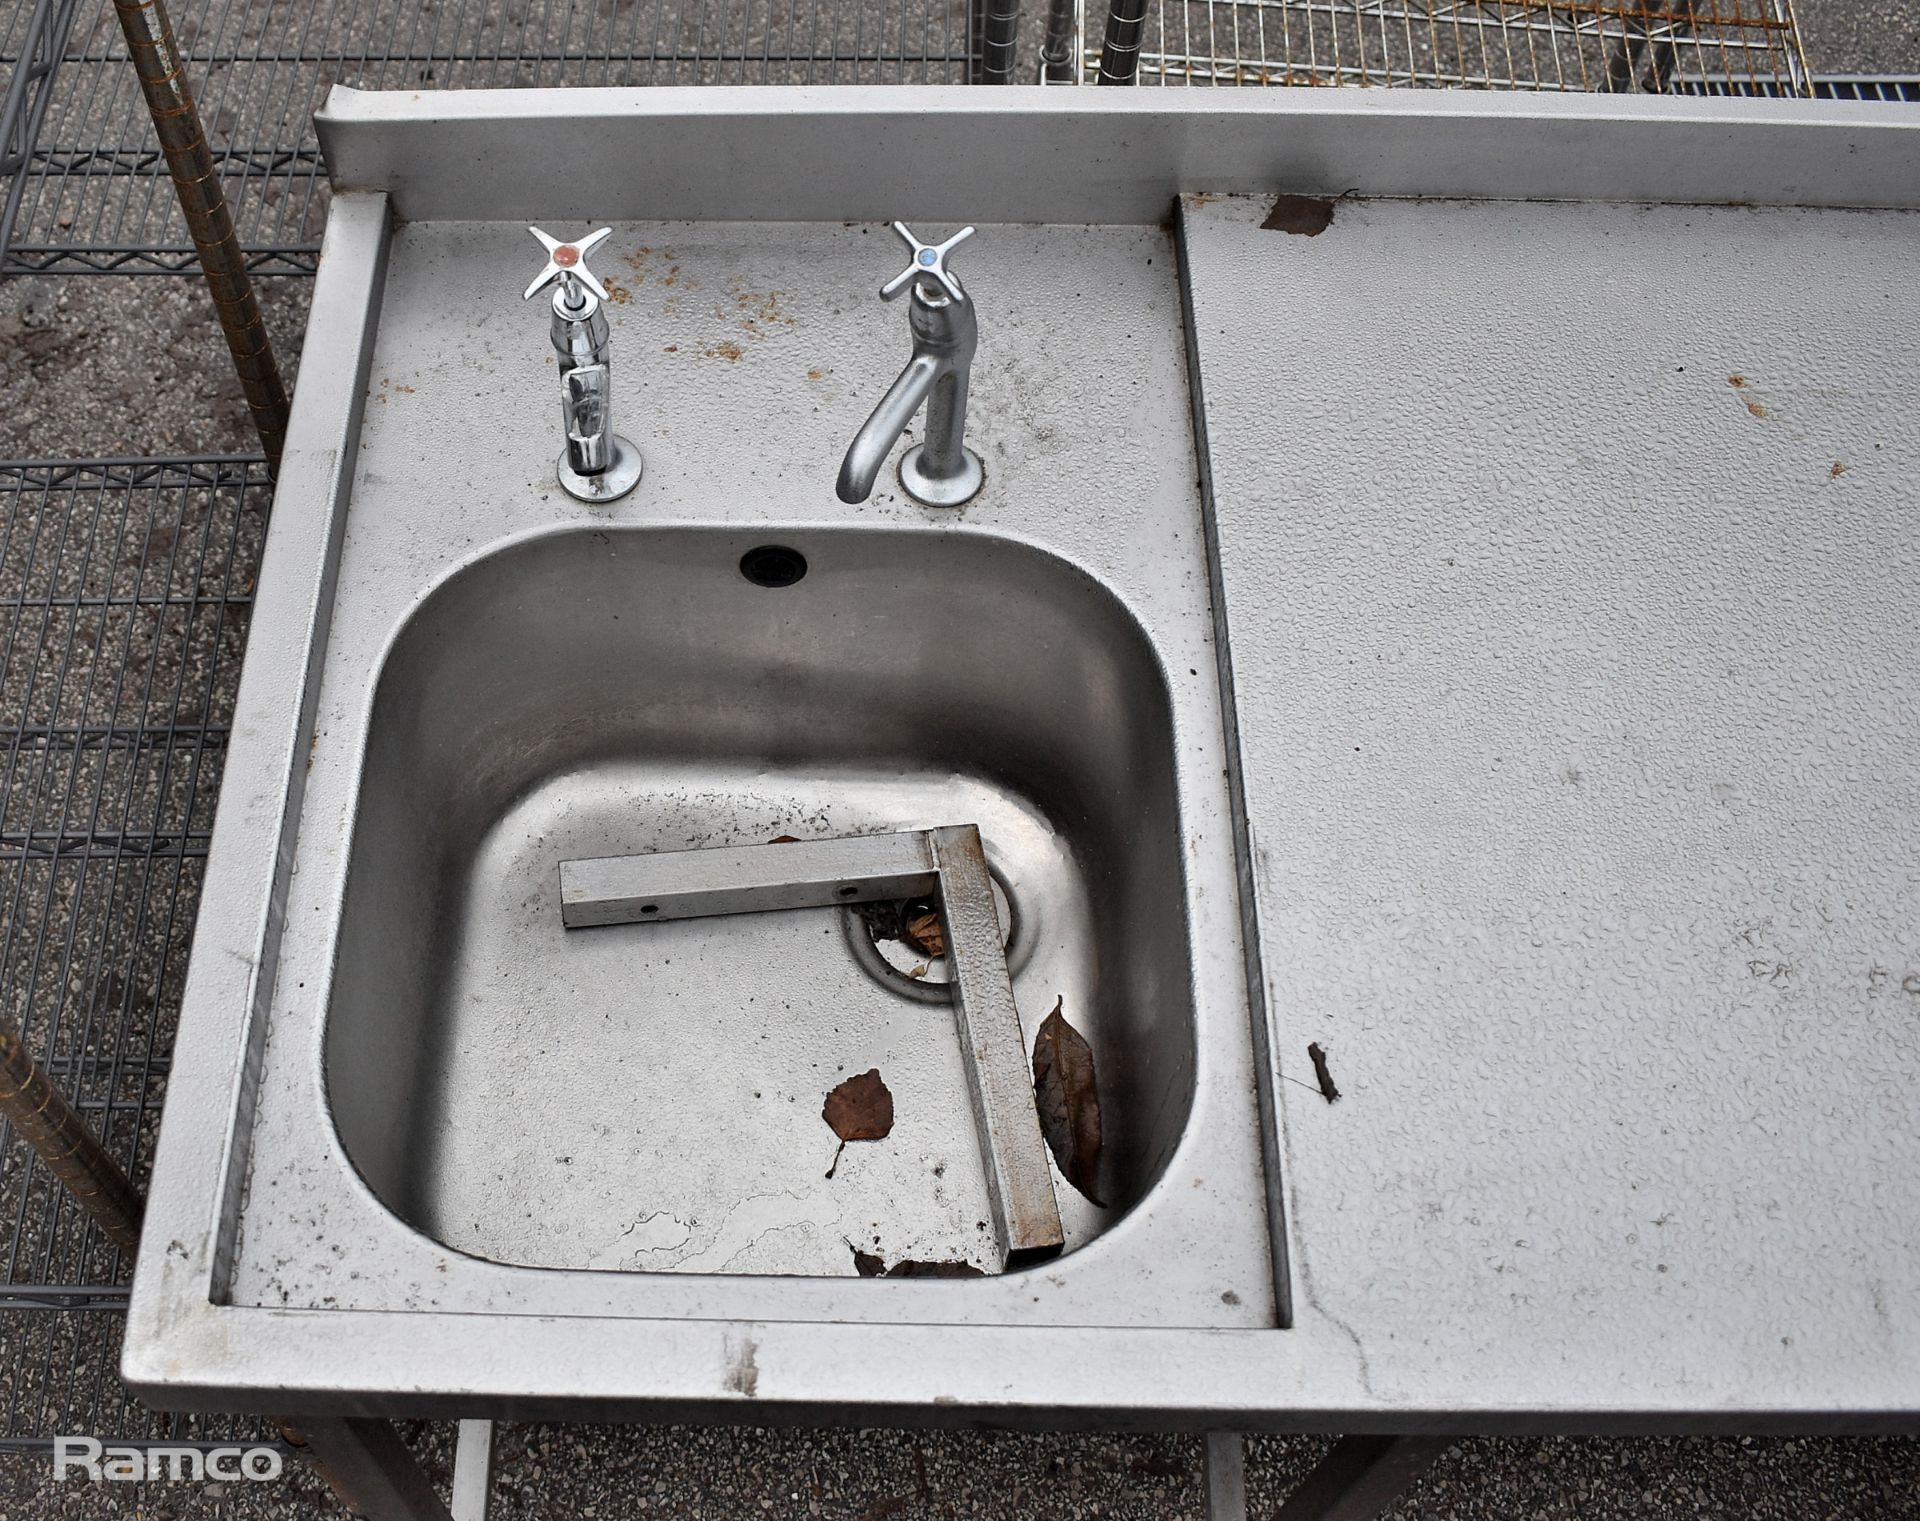 Stainless steel sink unit with upstand - dimensions: 130x70x96cm - Image 3 of 4